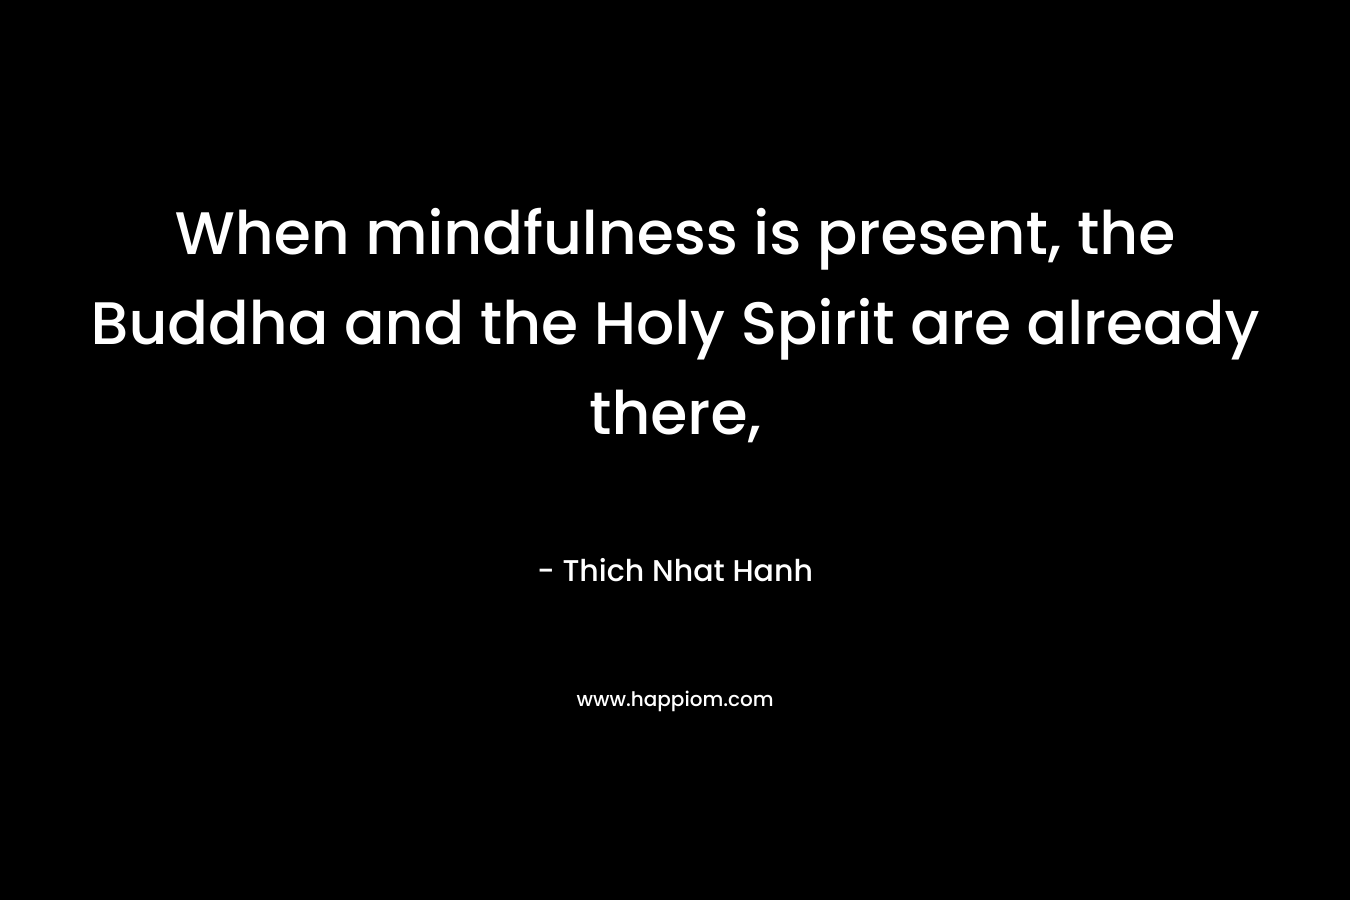 When mindfulness is present, the Buddha and the Holy Spirit are already there,